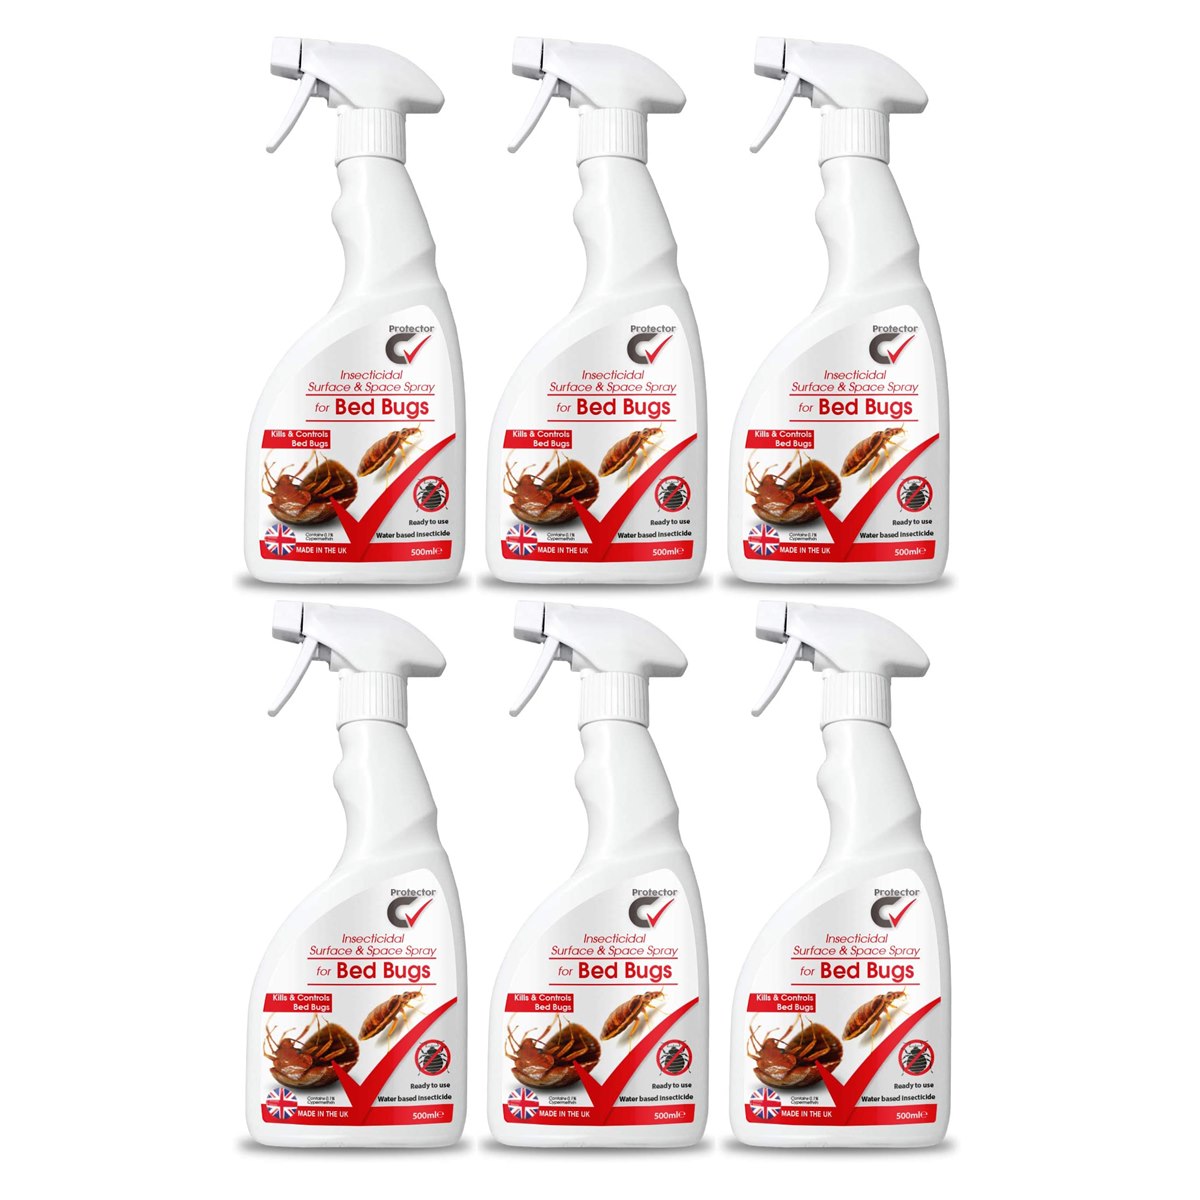 Case of 6 x Protector C Insecticidal Spray For Bed Bugs 500ml